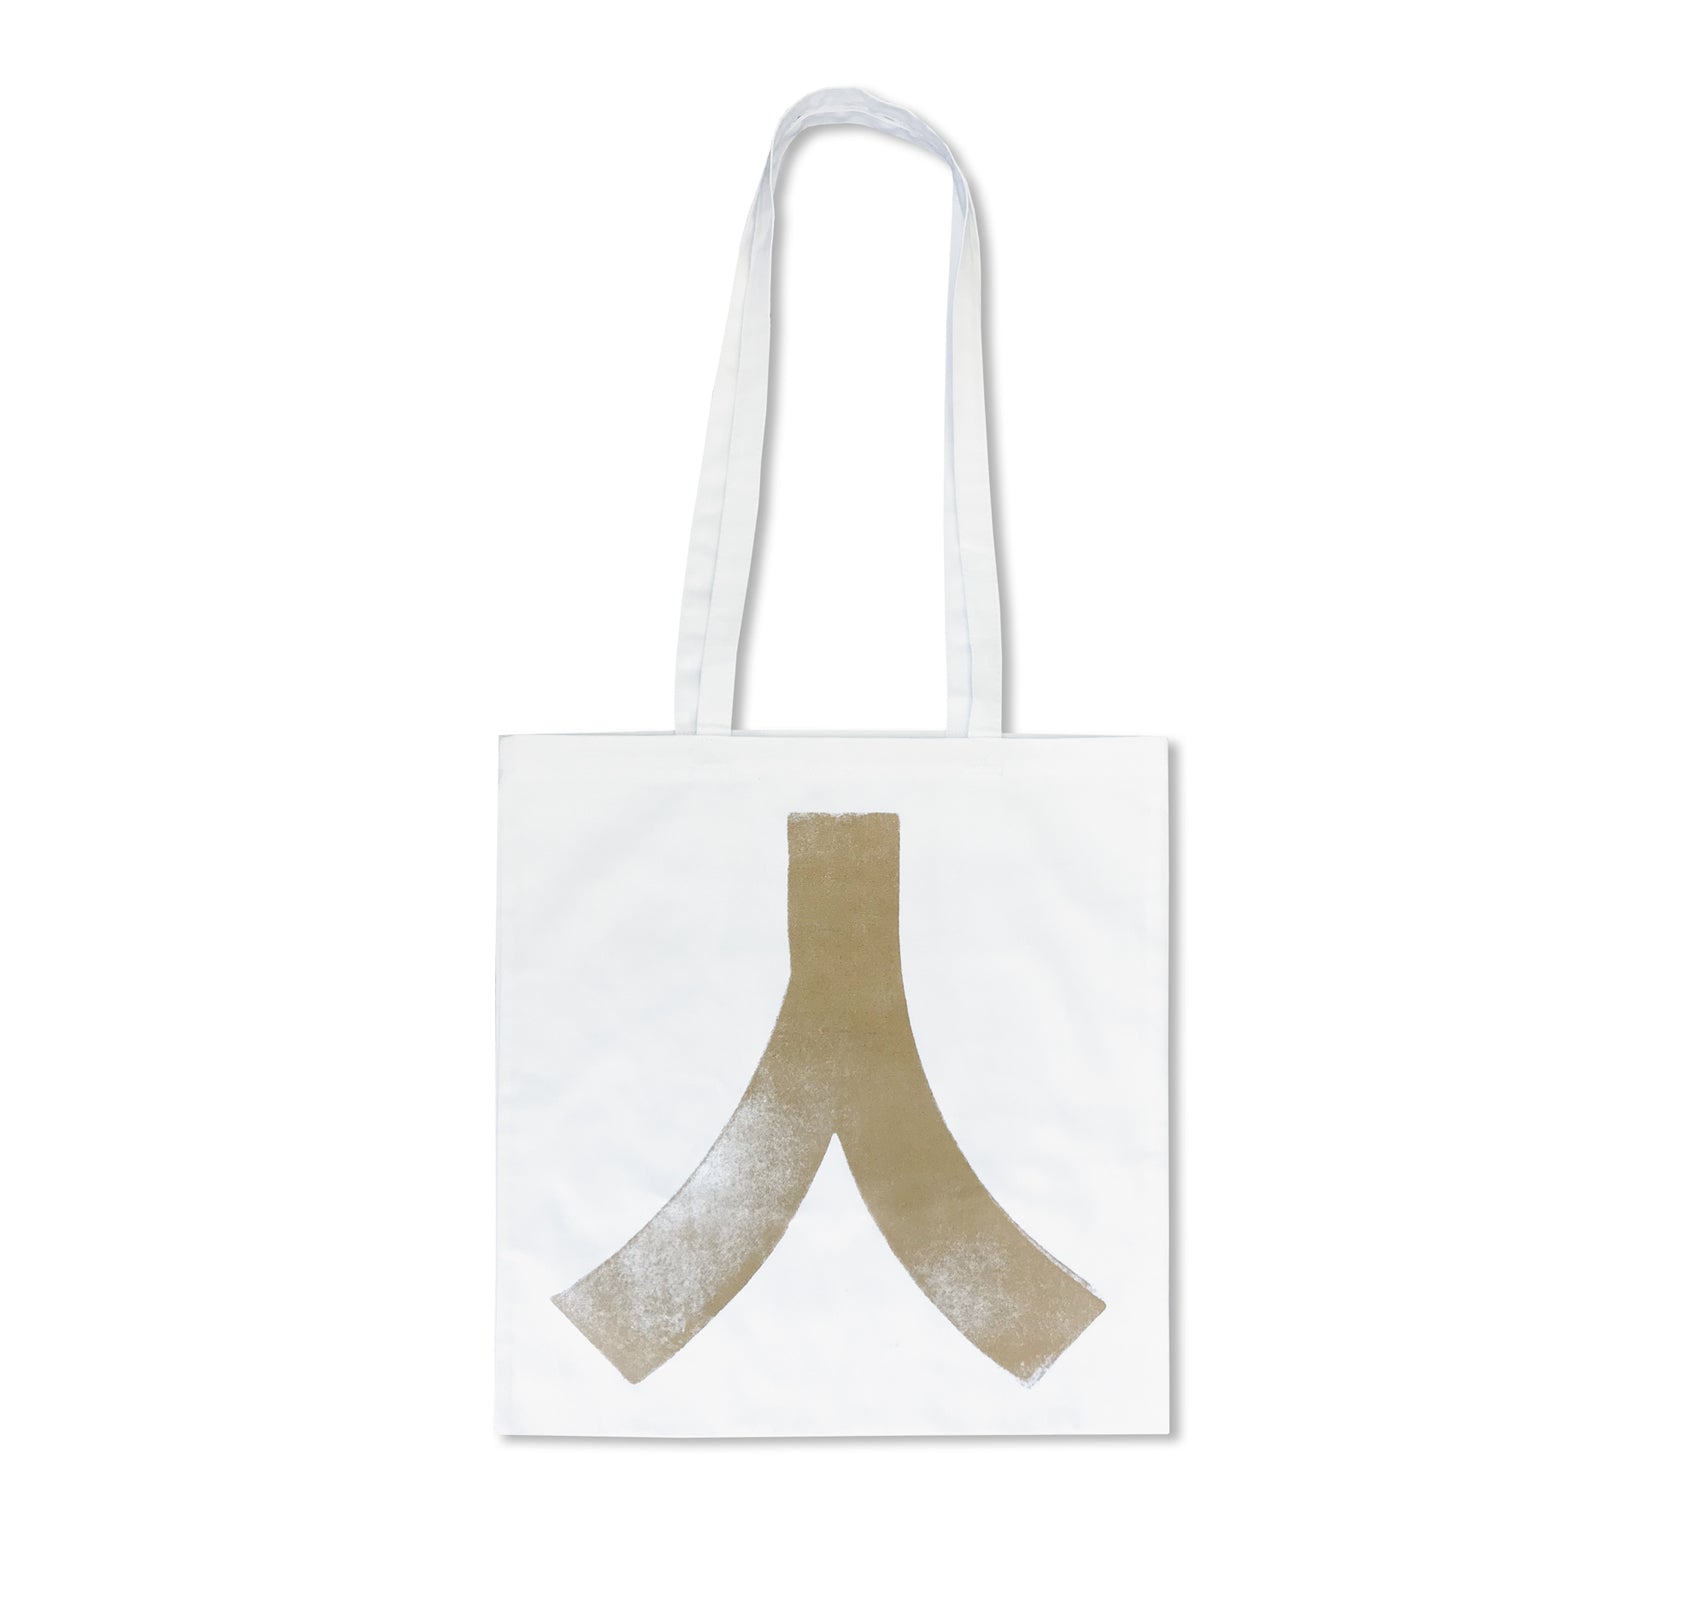 REN TOTE BAG by Christopher Anderson